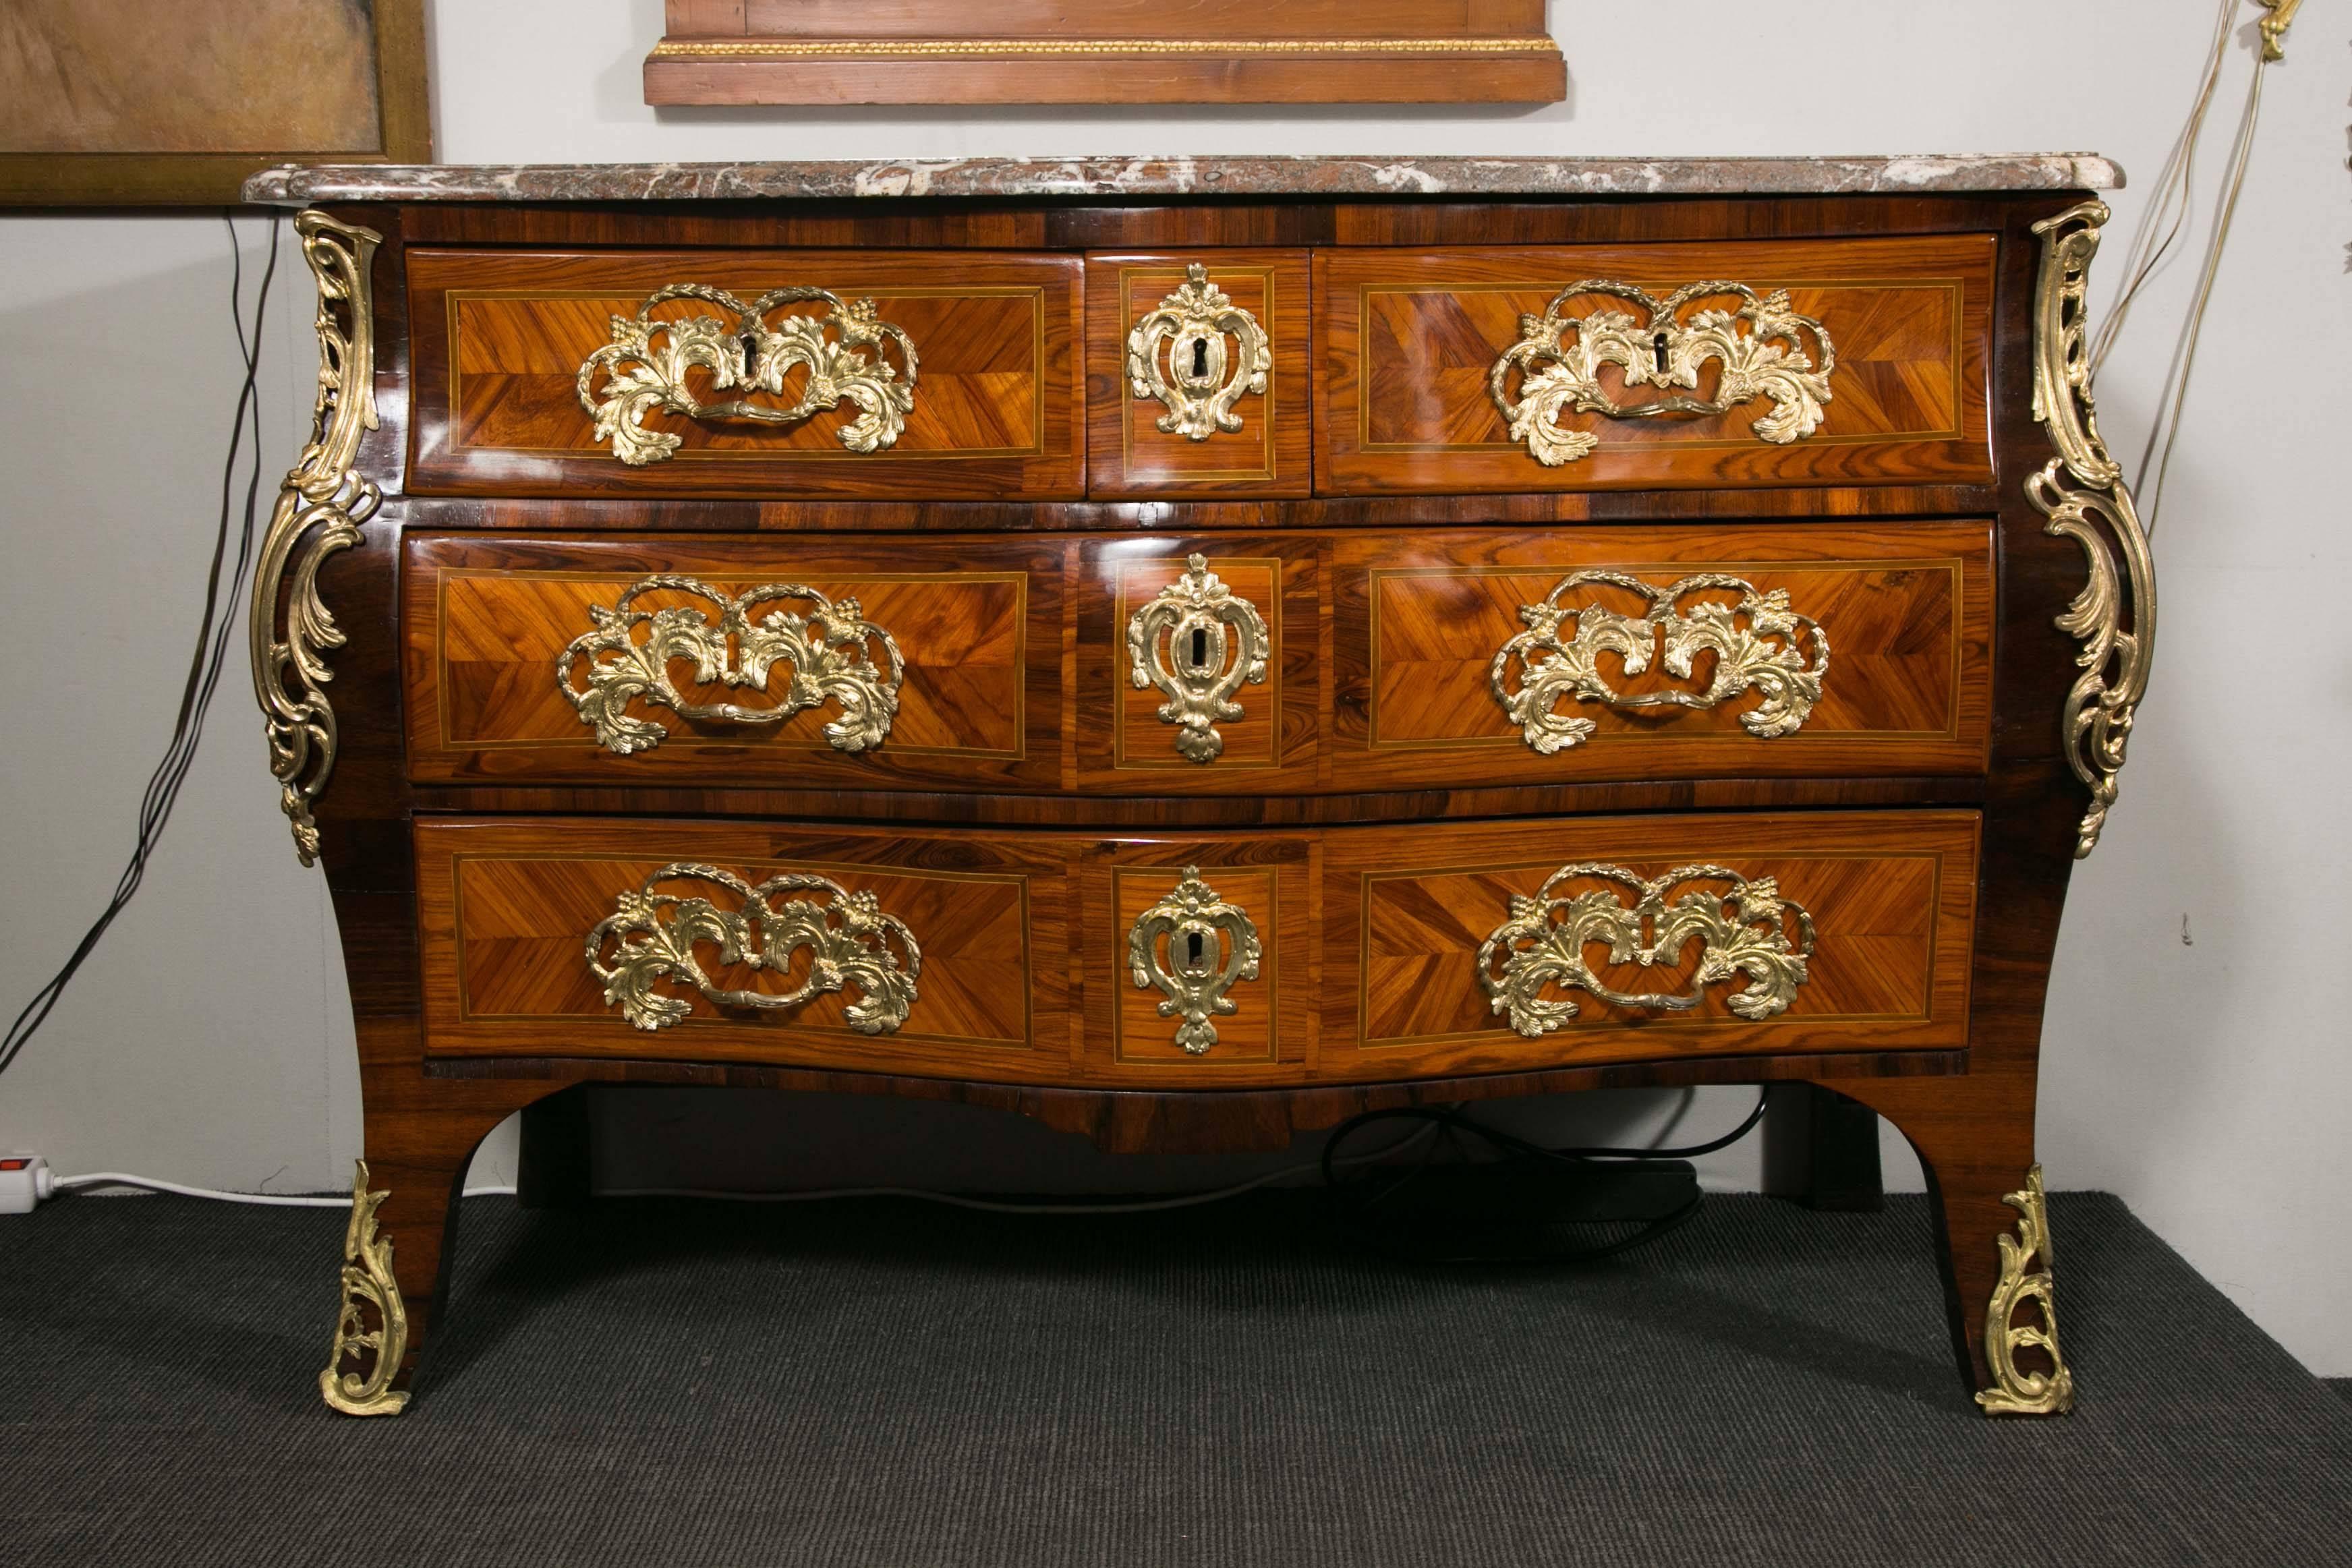 Elegant 18th century commode in marquetry and rare inlaid woods with original bronze mounts. Louis XV period. Stamped 